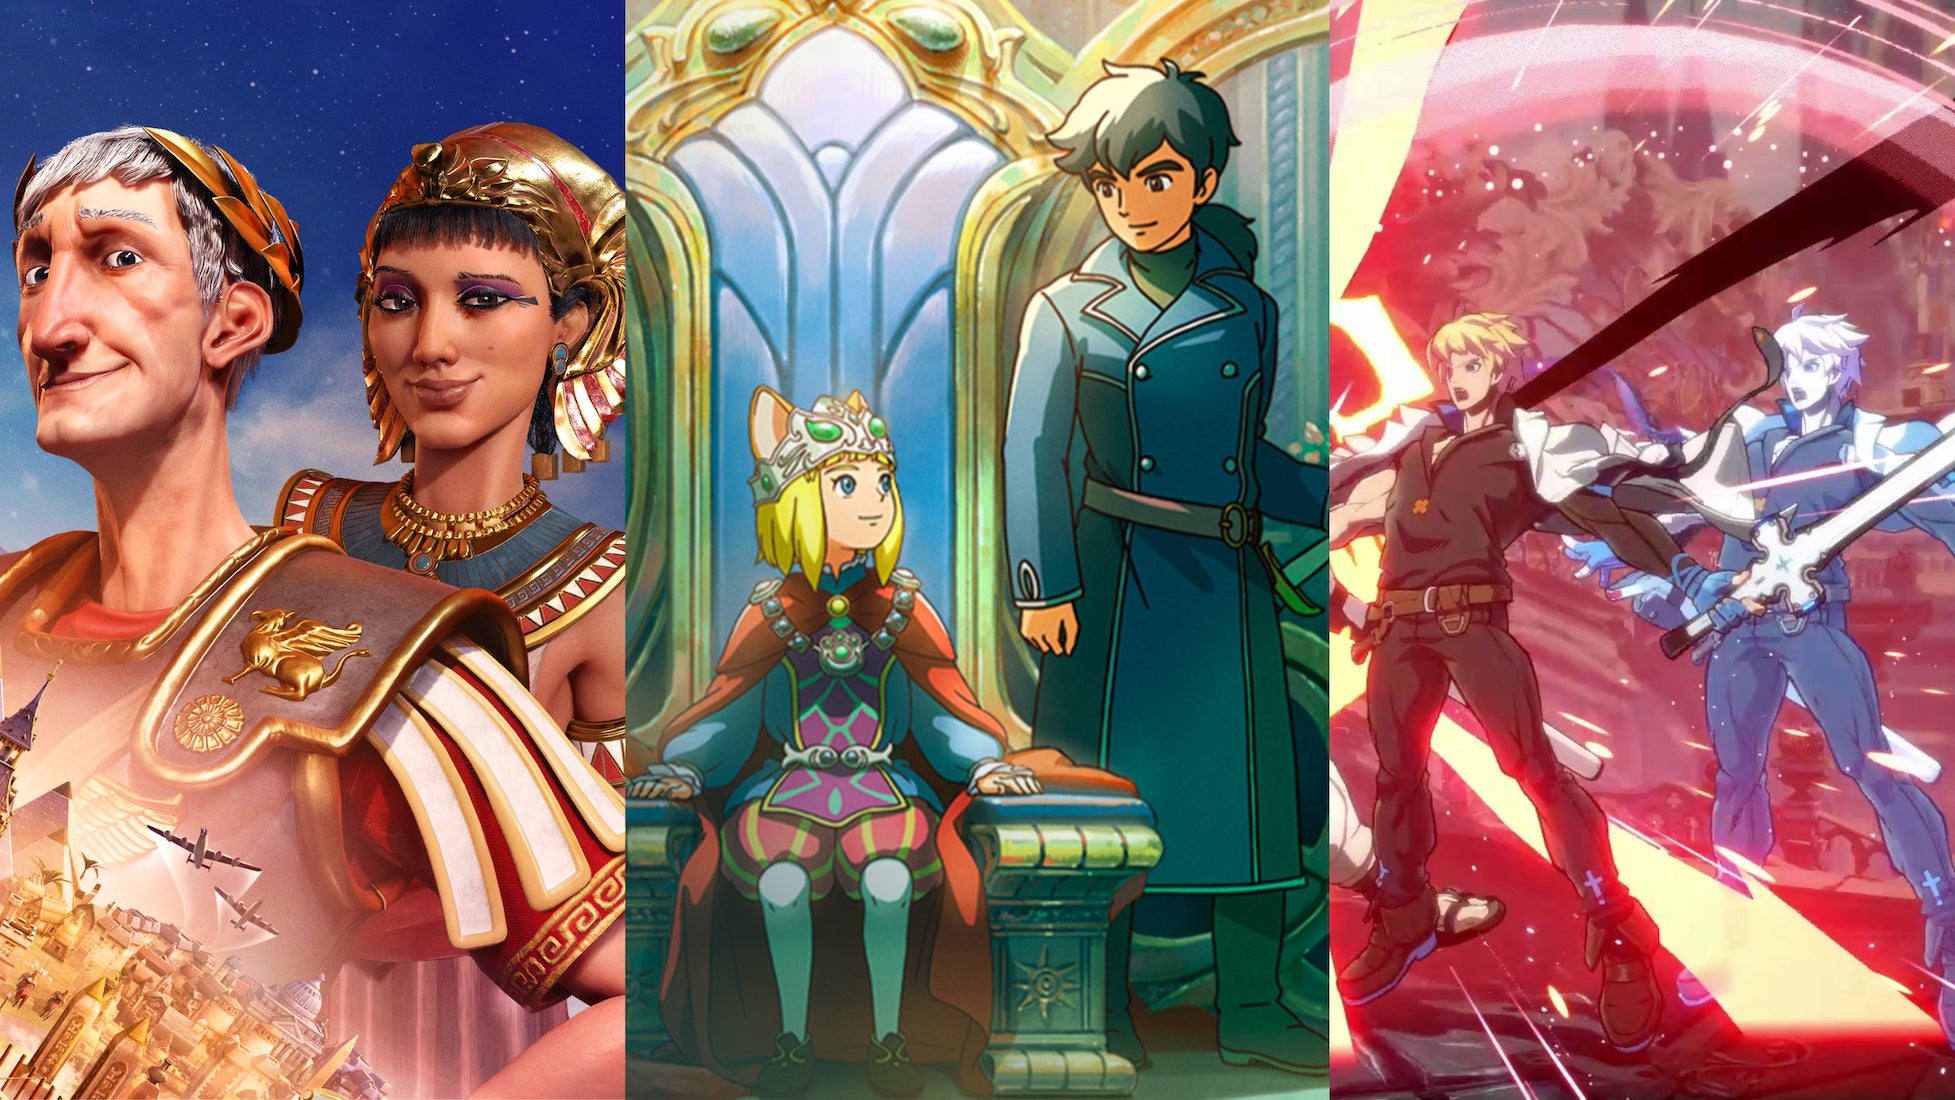 Image split three ways with Civilisation 6 artwork on the left, Ni No Kuni 2 in the middle, and a battle screenshot from Guilty Gear Strive on the right